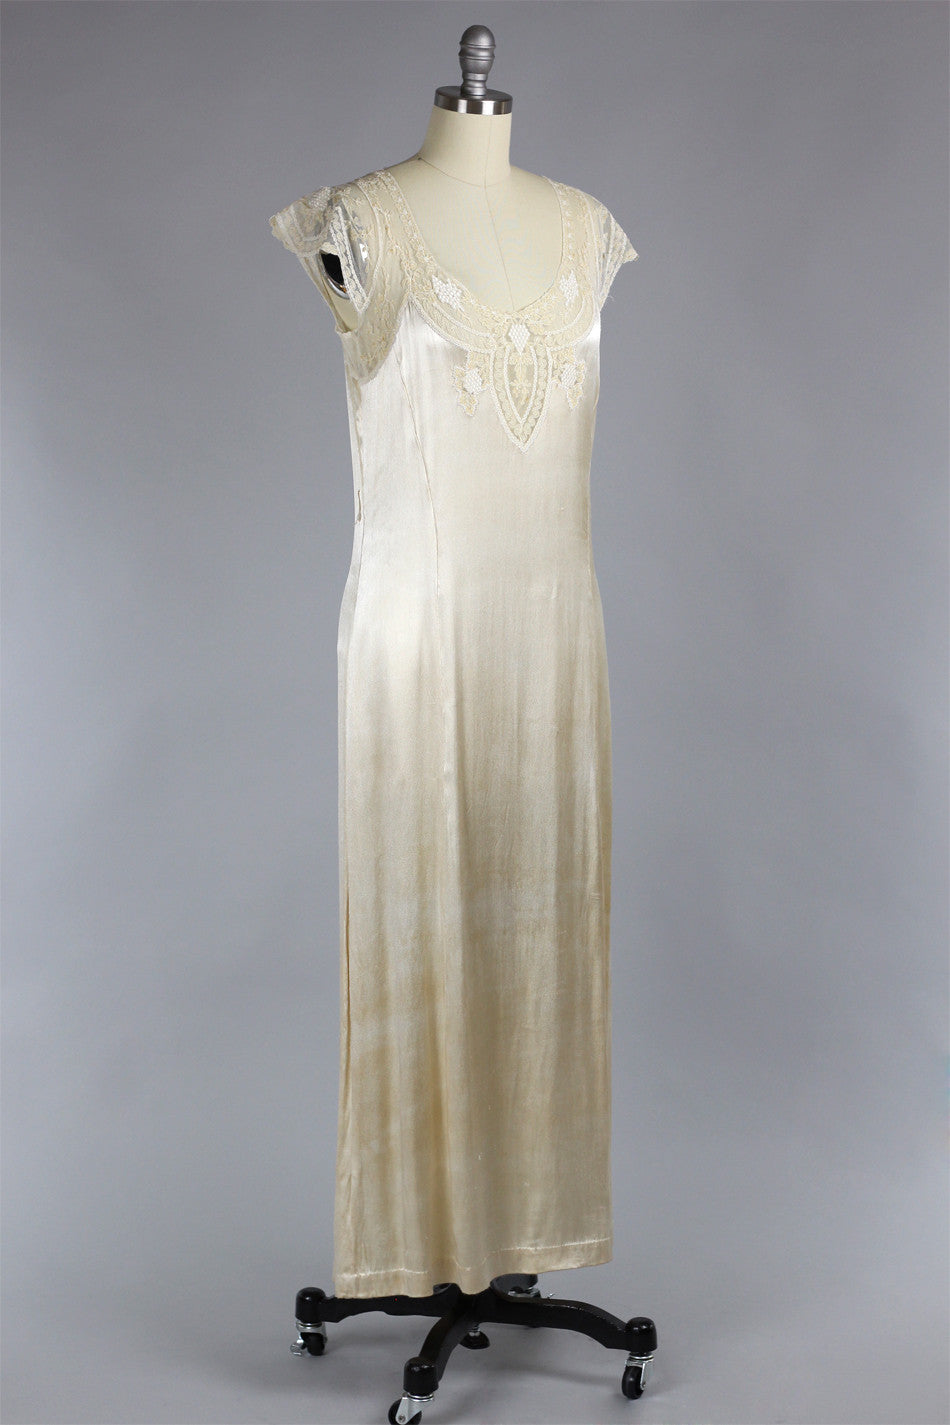 Venetian Lace 1920s Oyster Silk Duchess Charmeuse Gown